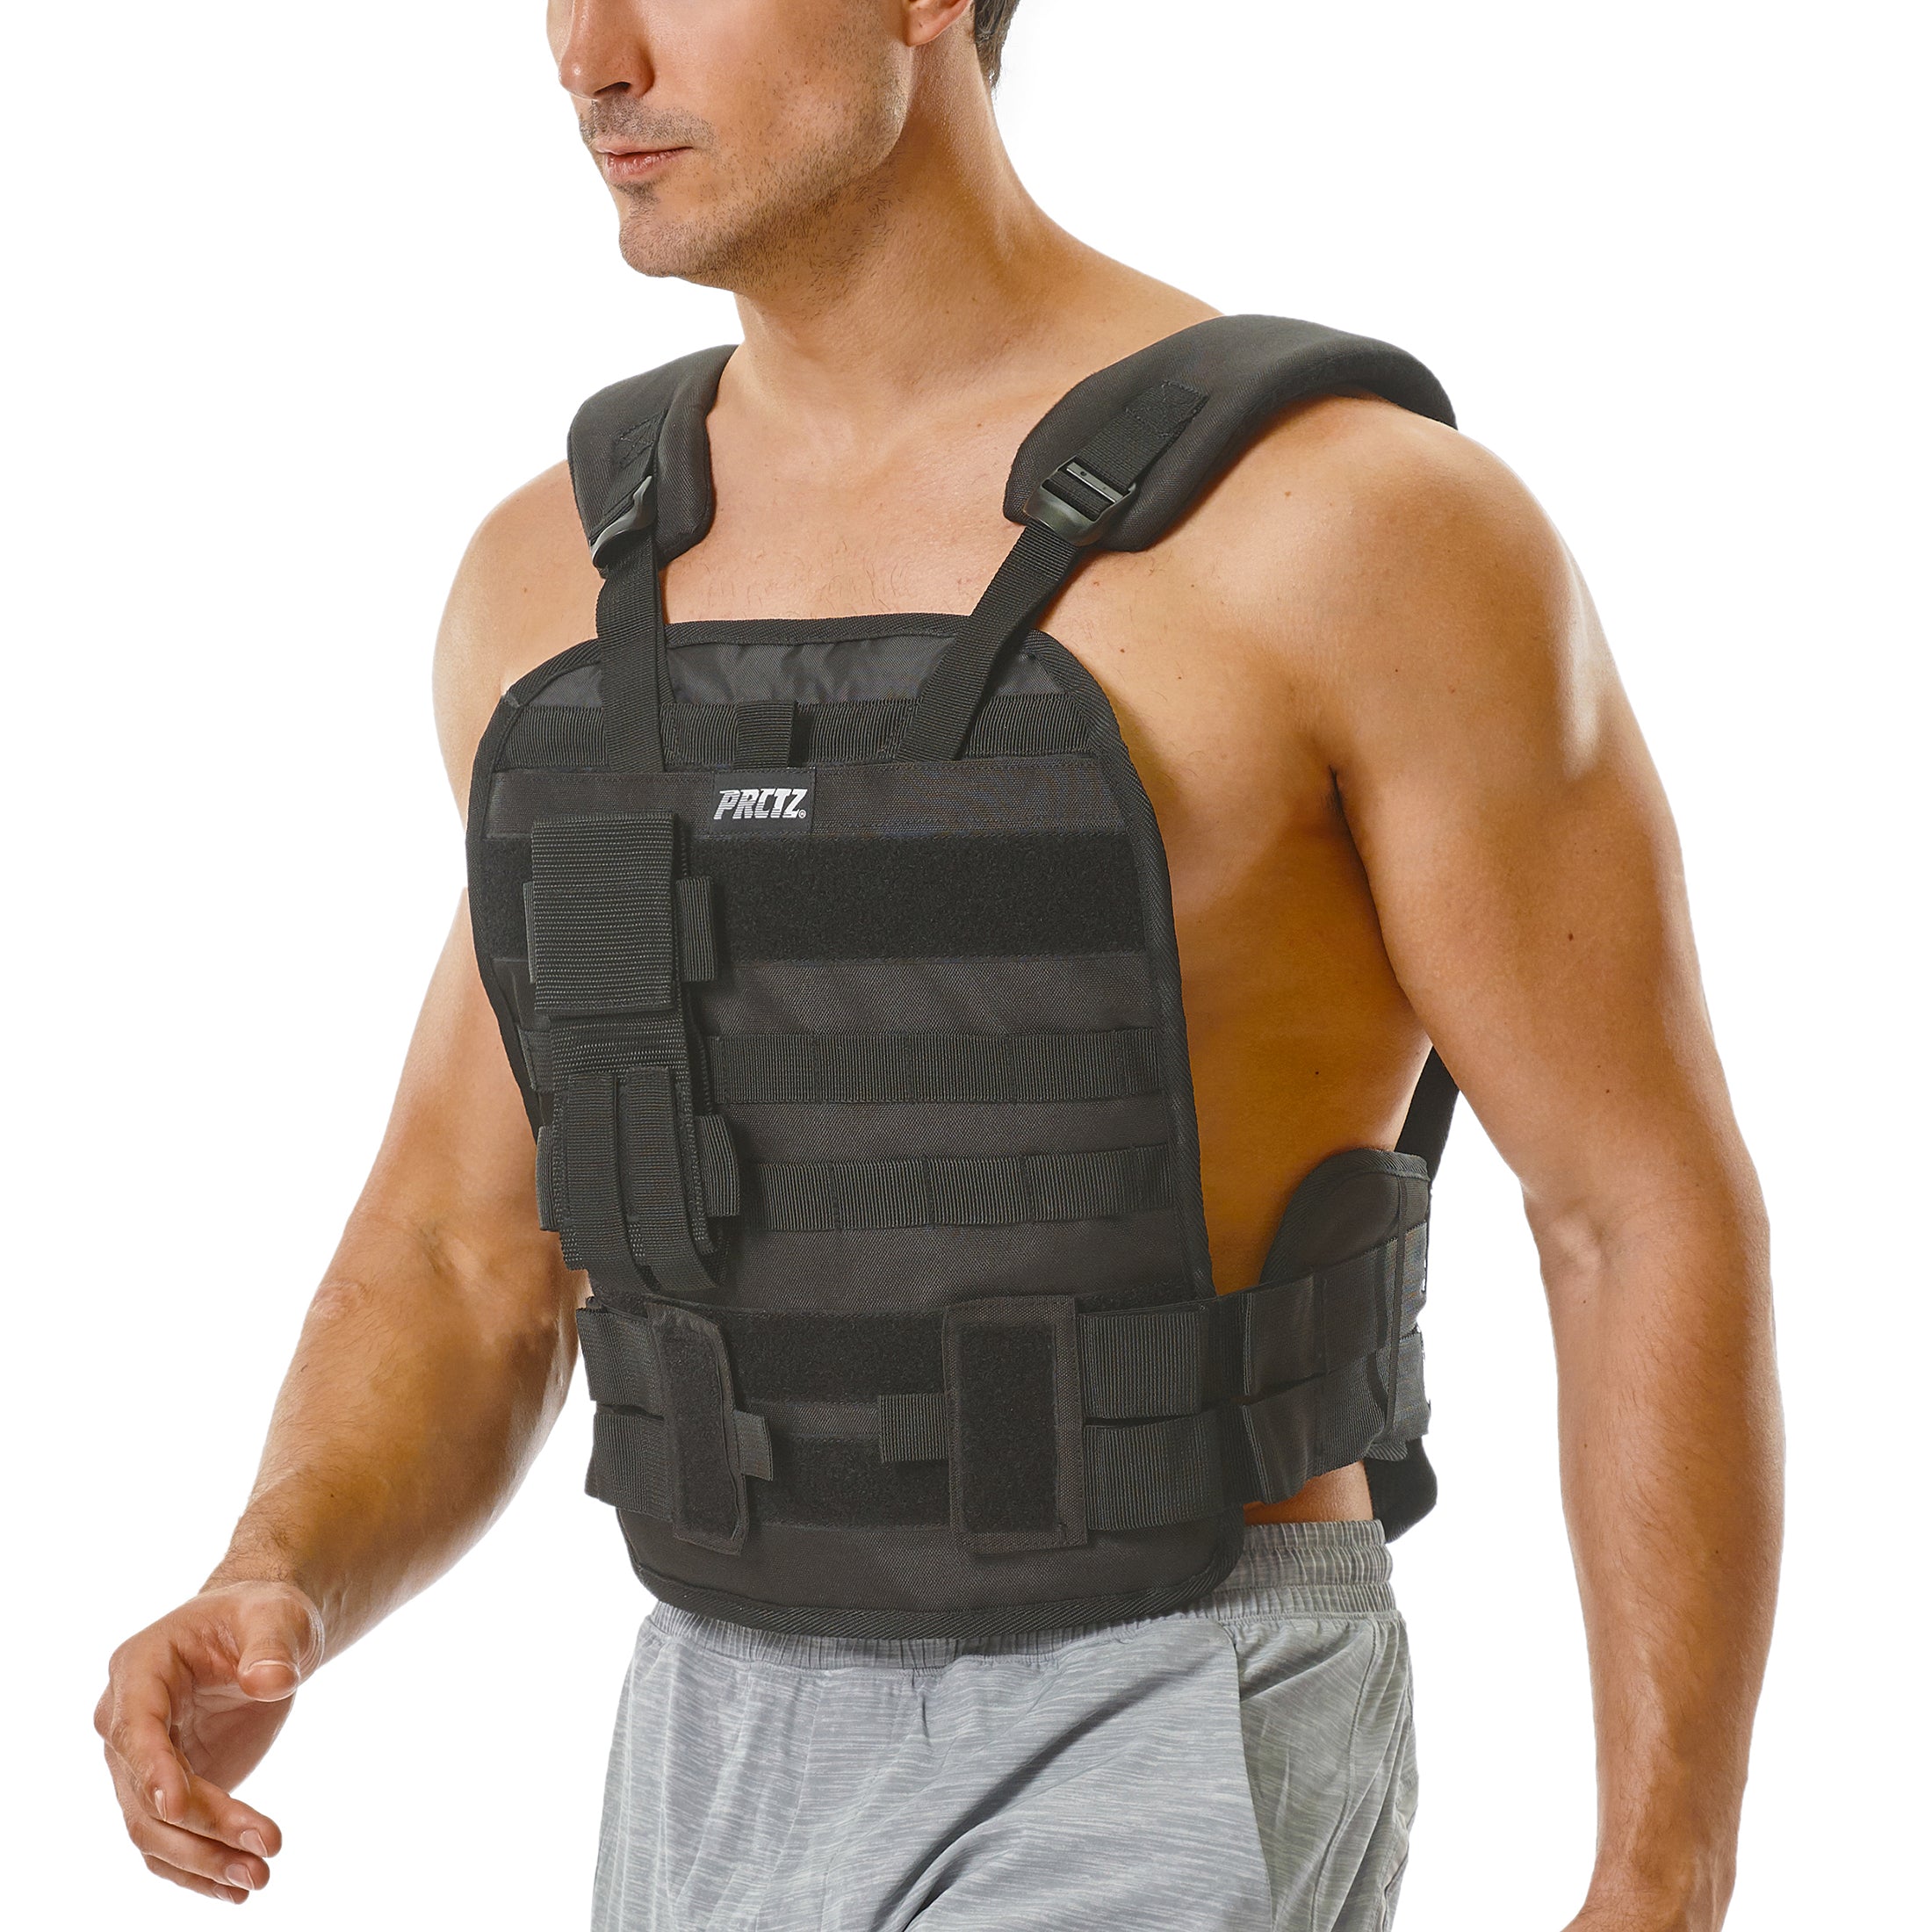  mIR Adjustable Weighted Vest, 20 lb. : Sports & Outdoors